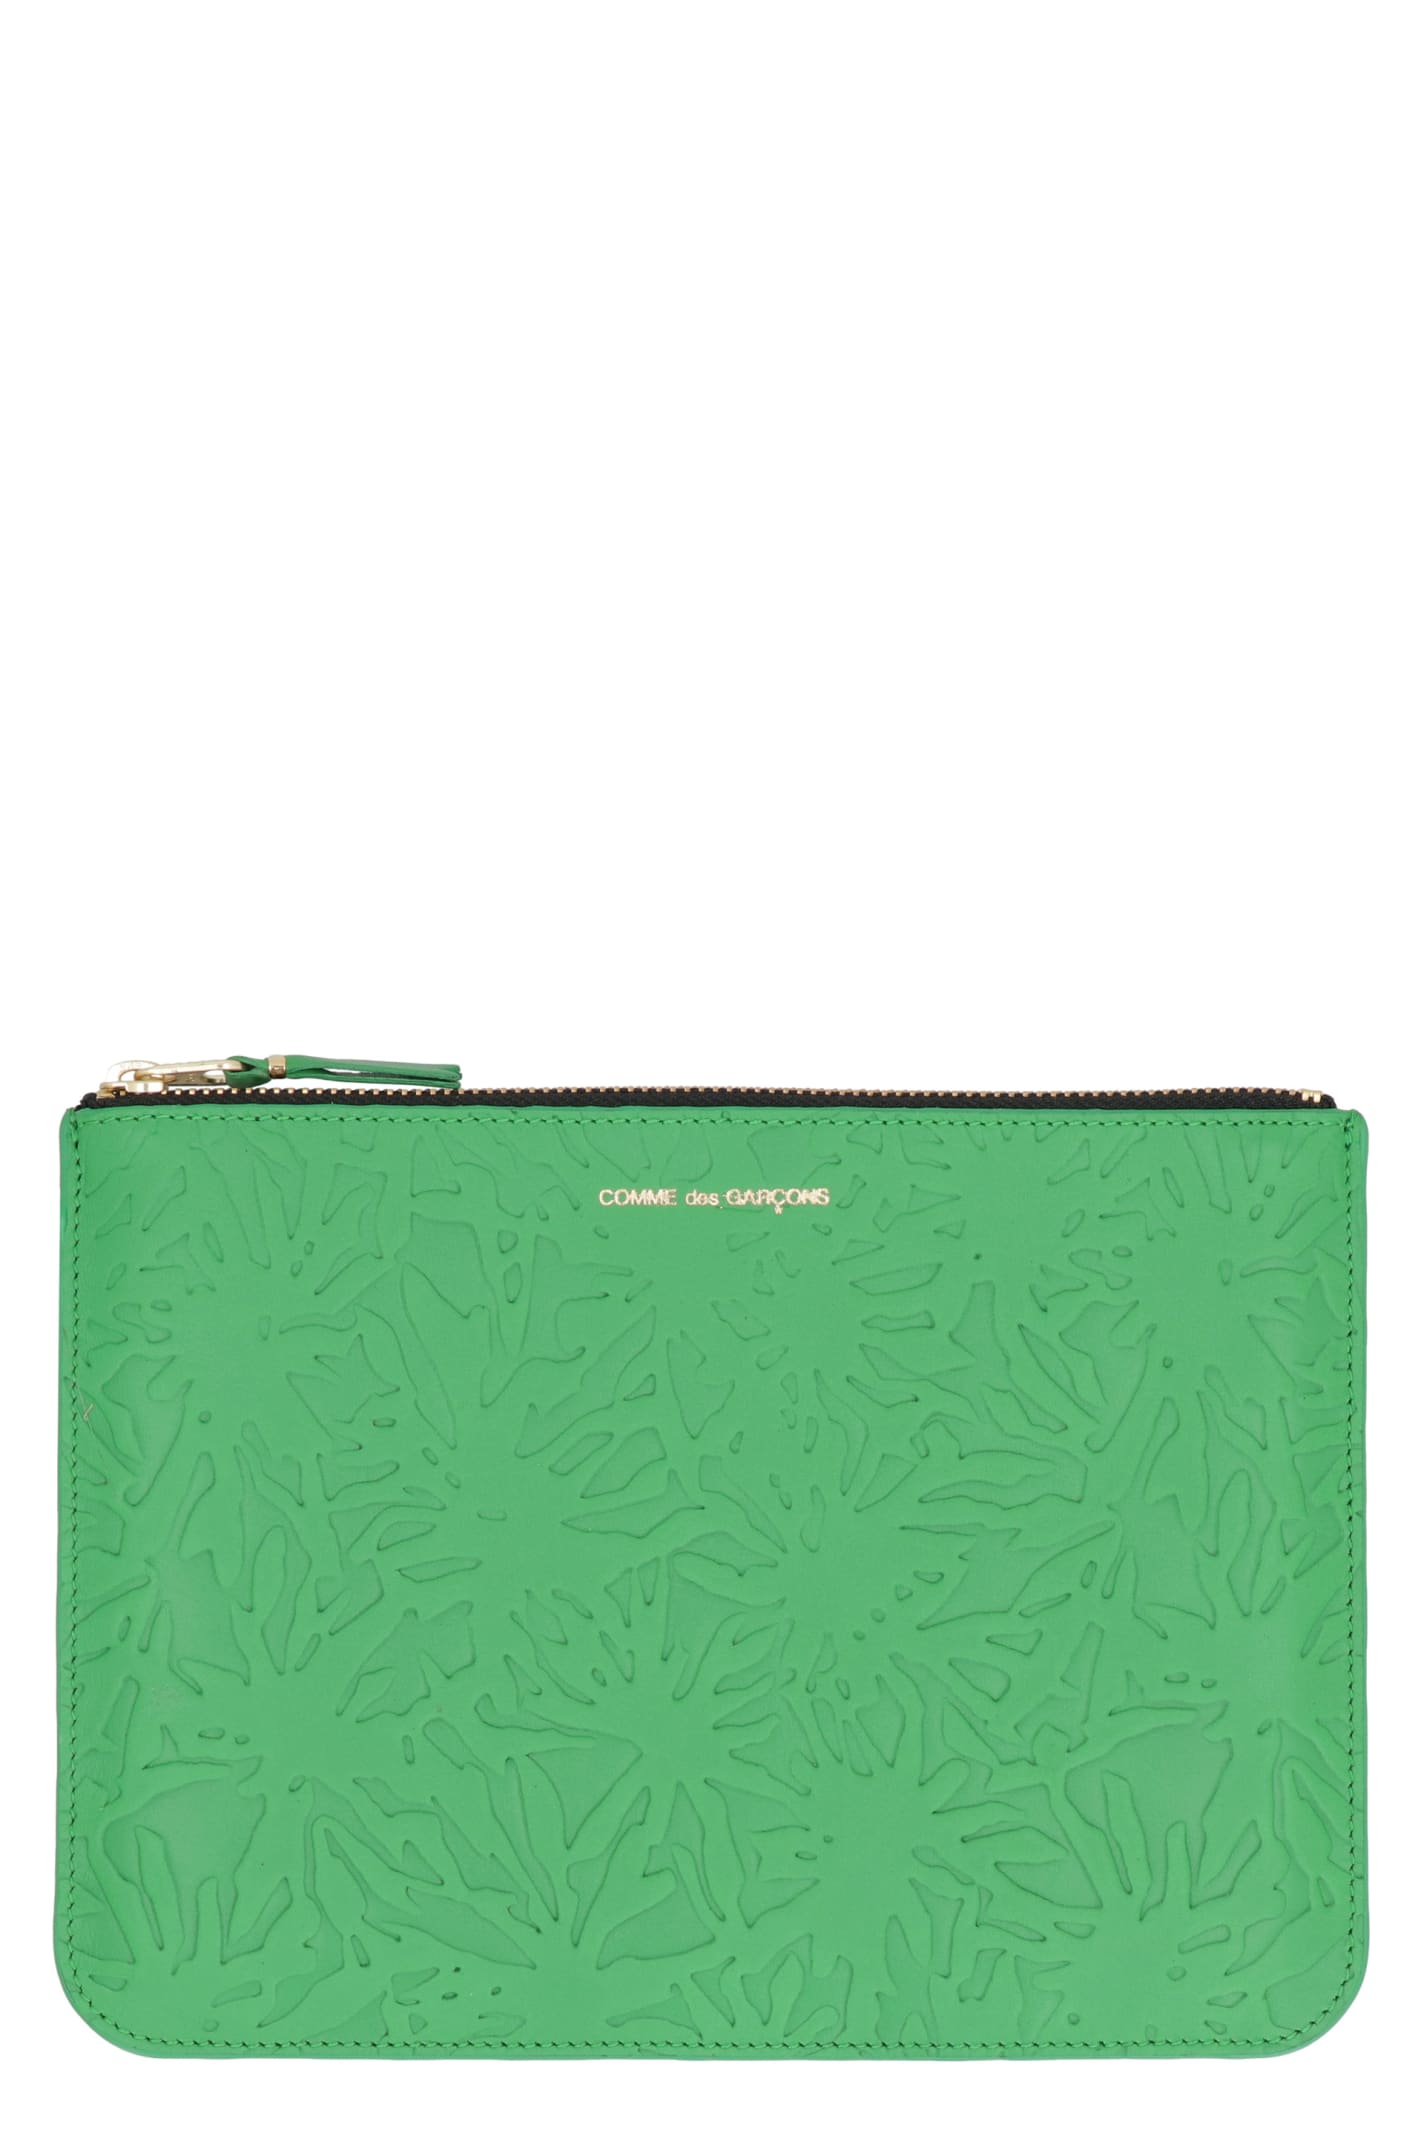 Comme Des Garçons Leather Flat Pouch In Green